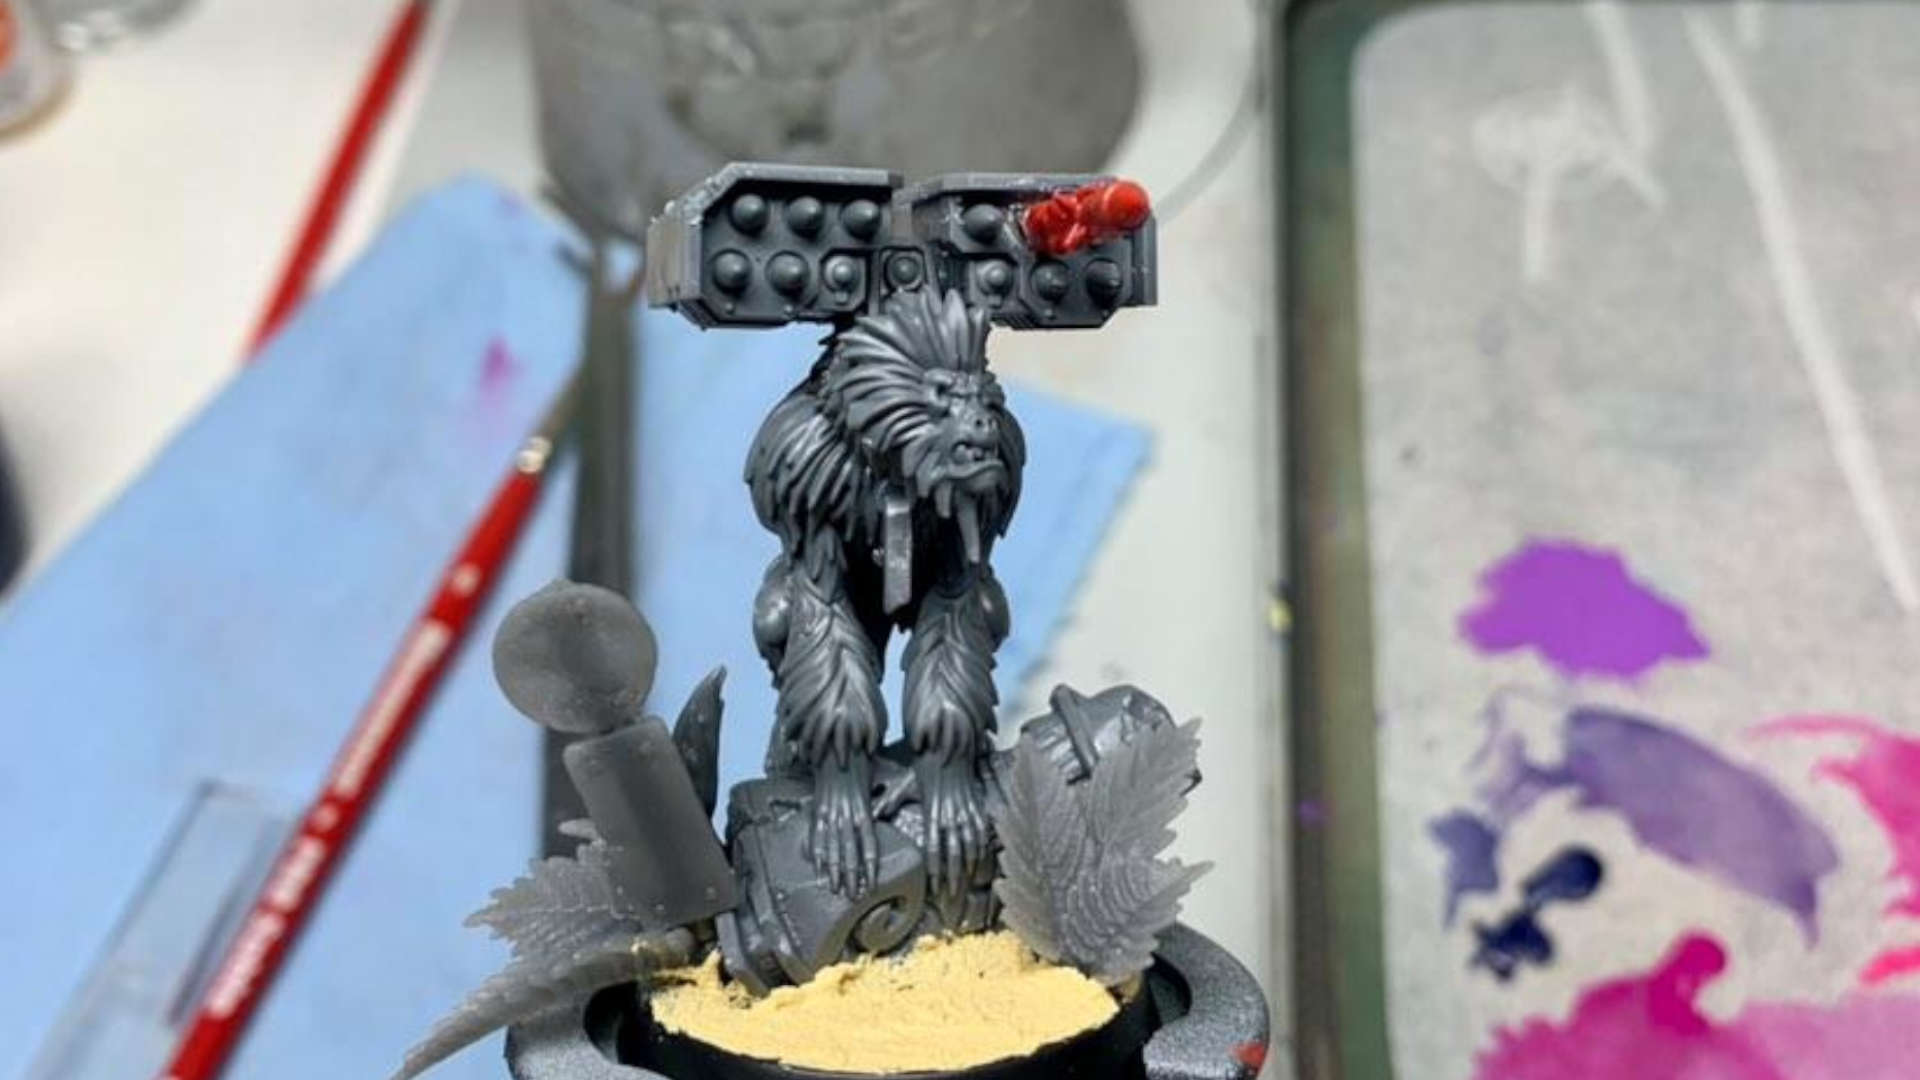 Warhammer 40k meets Planet of the Apes conversion - a model babboon rests on its hands, with a missile launcher strapped to its back